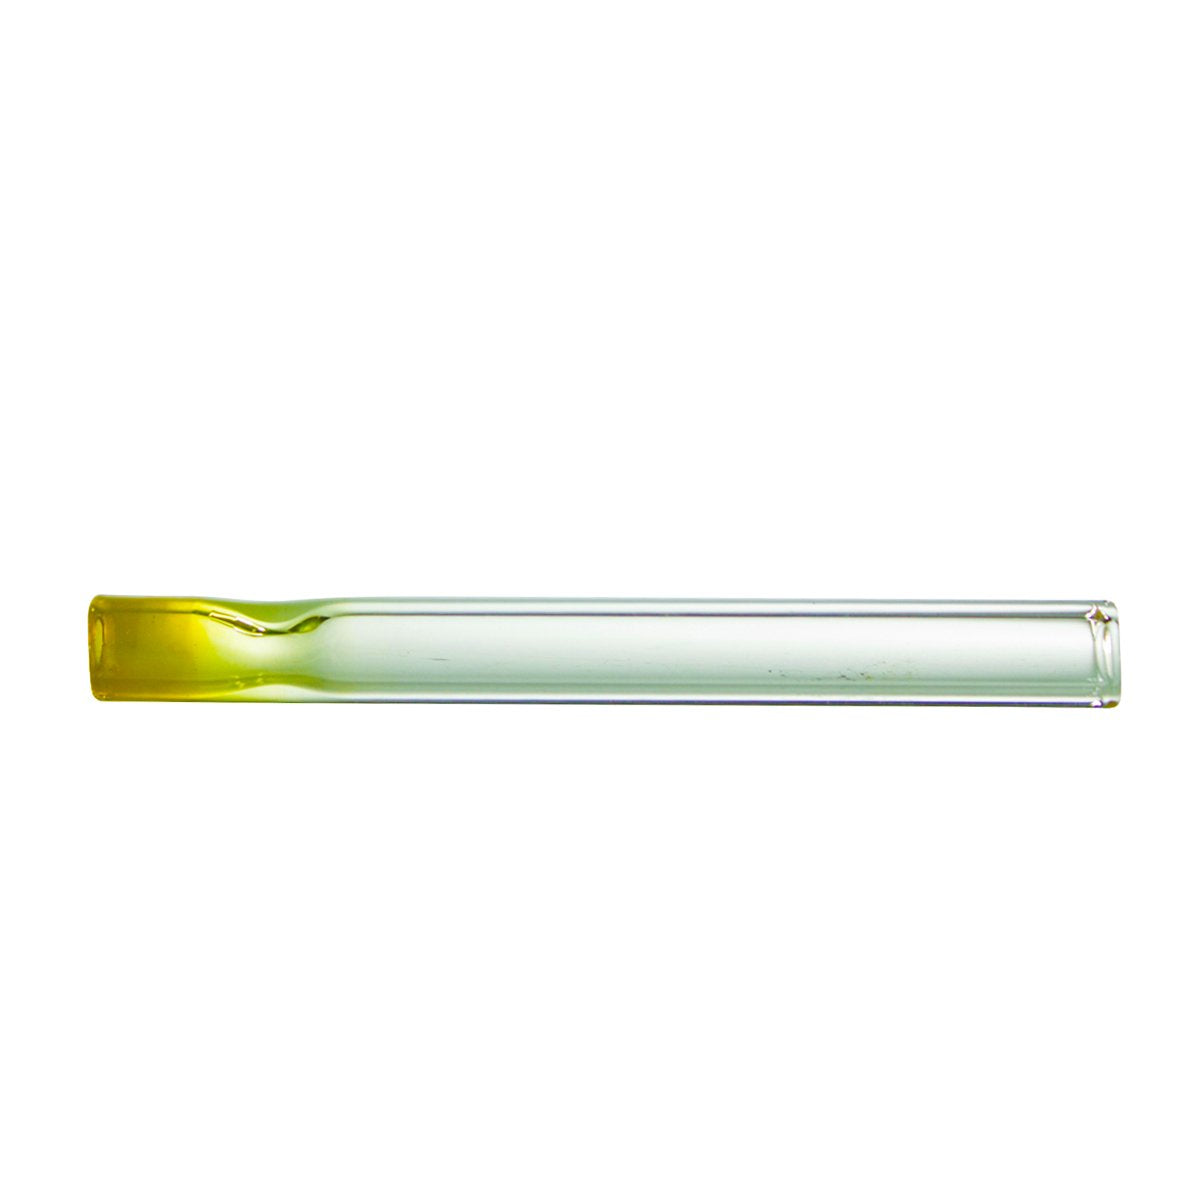 glass joint